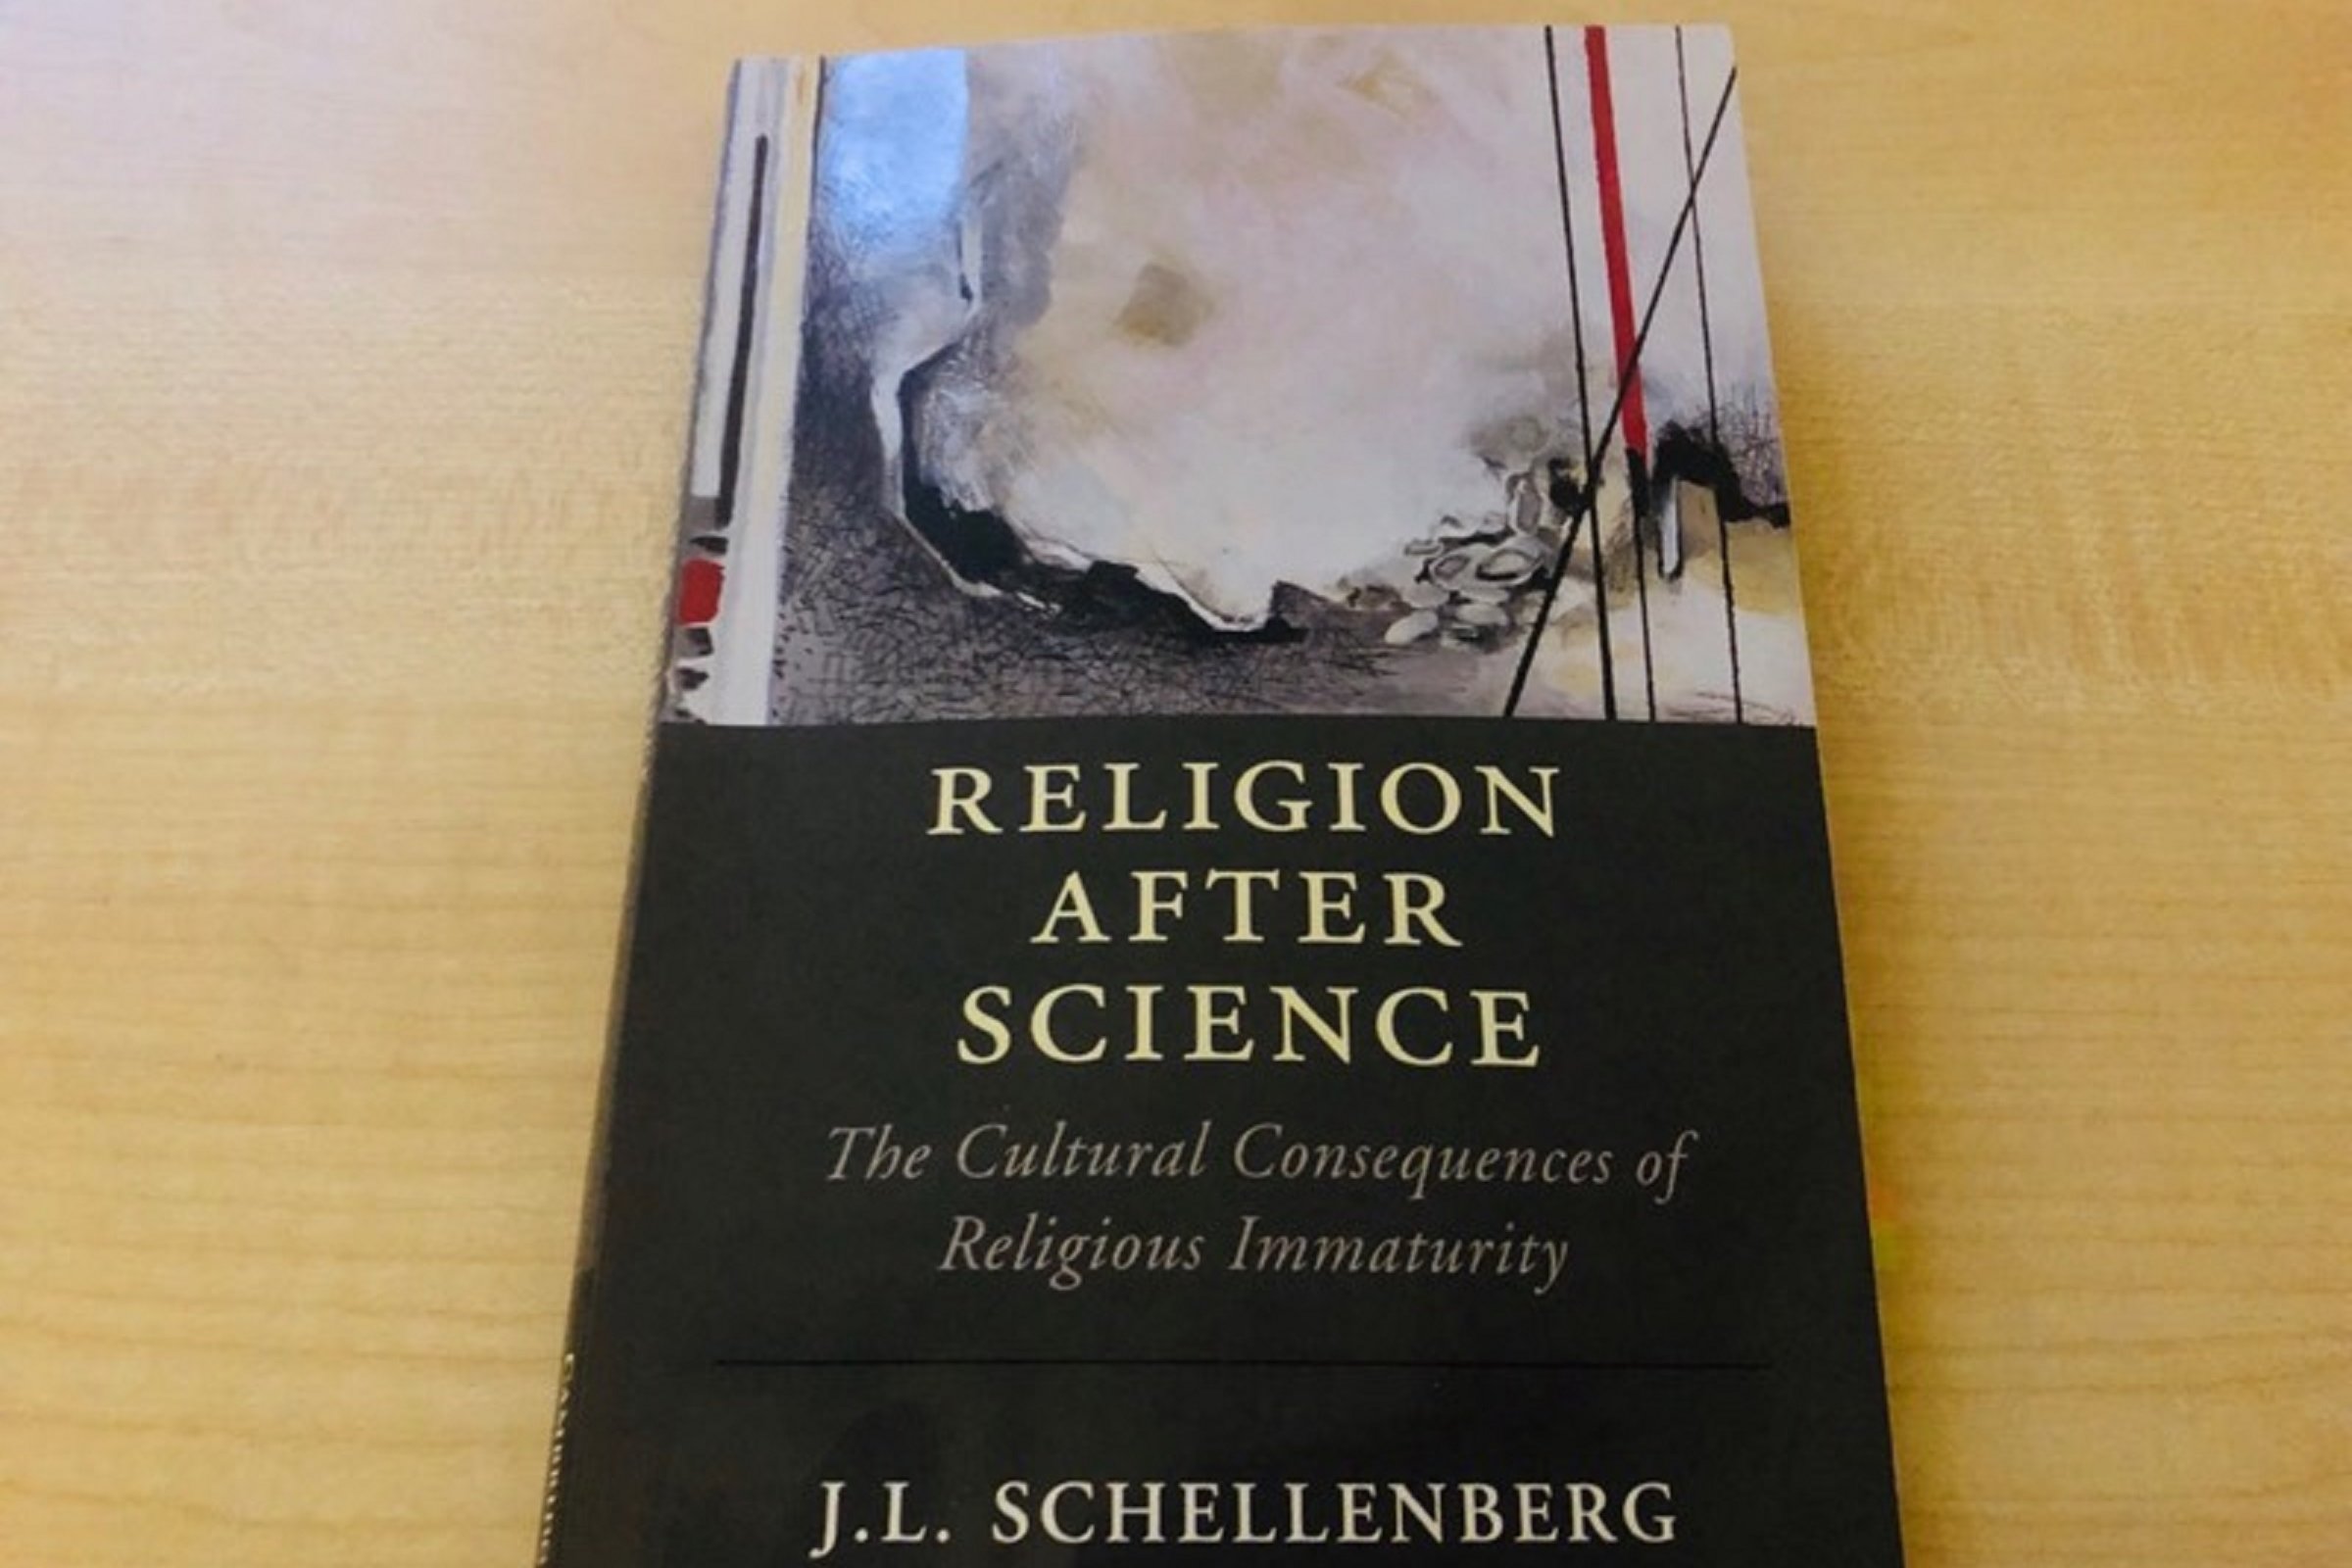 Religion after science